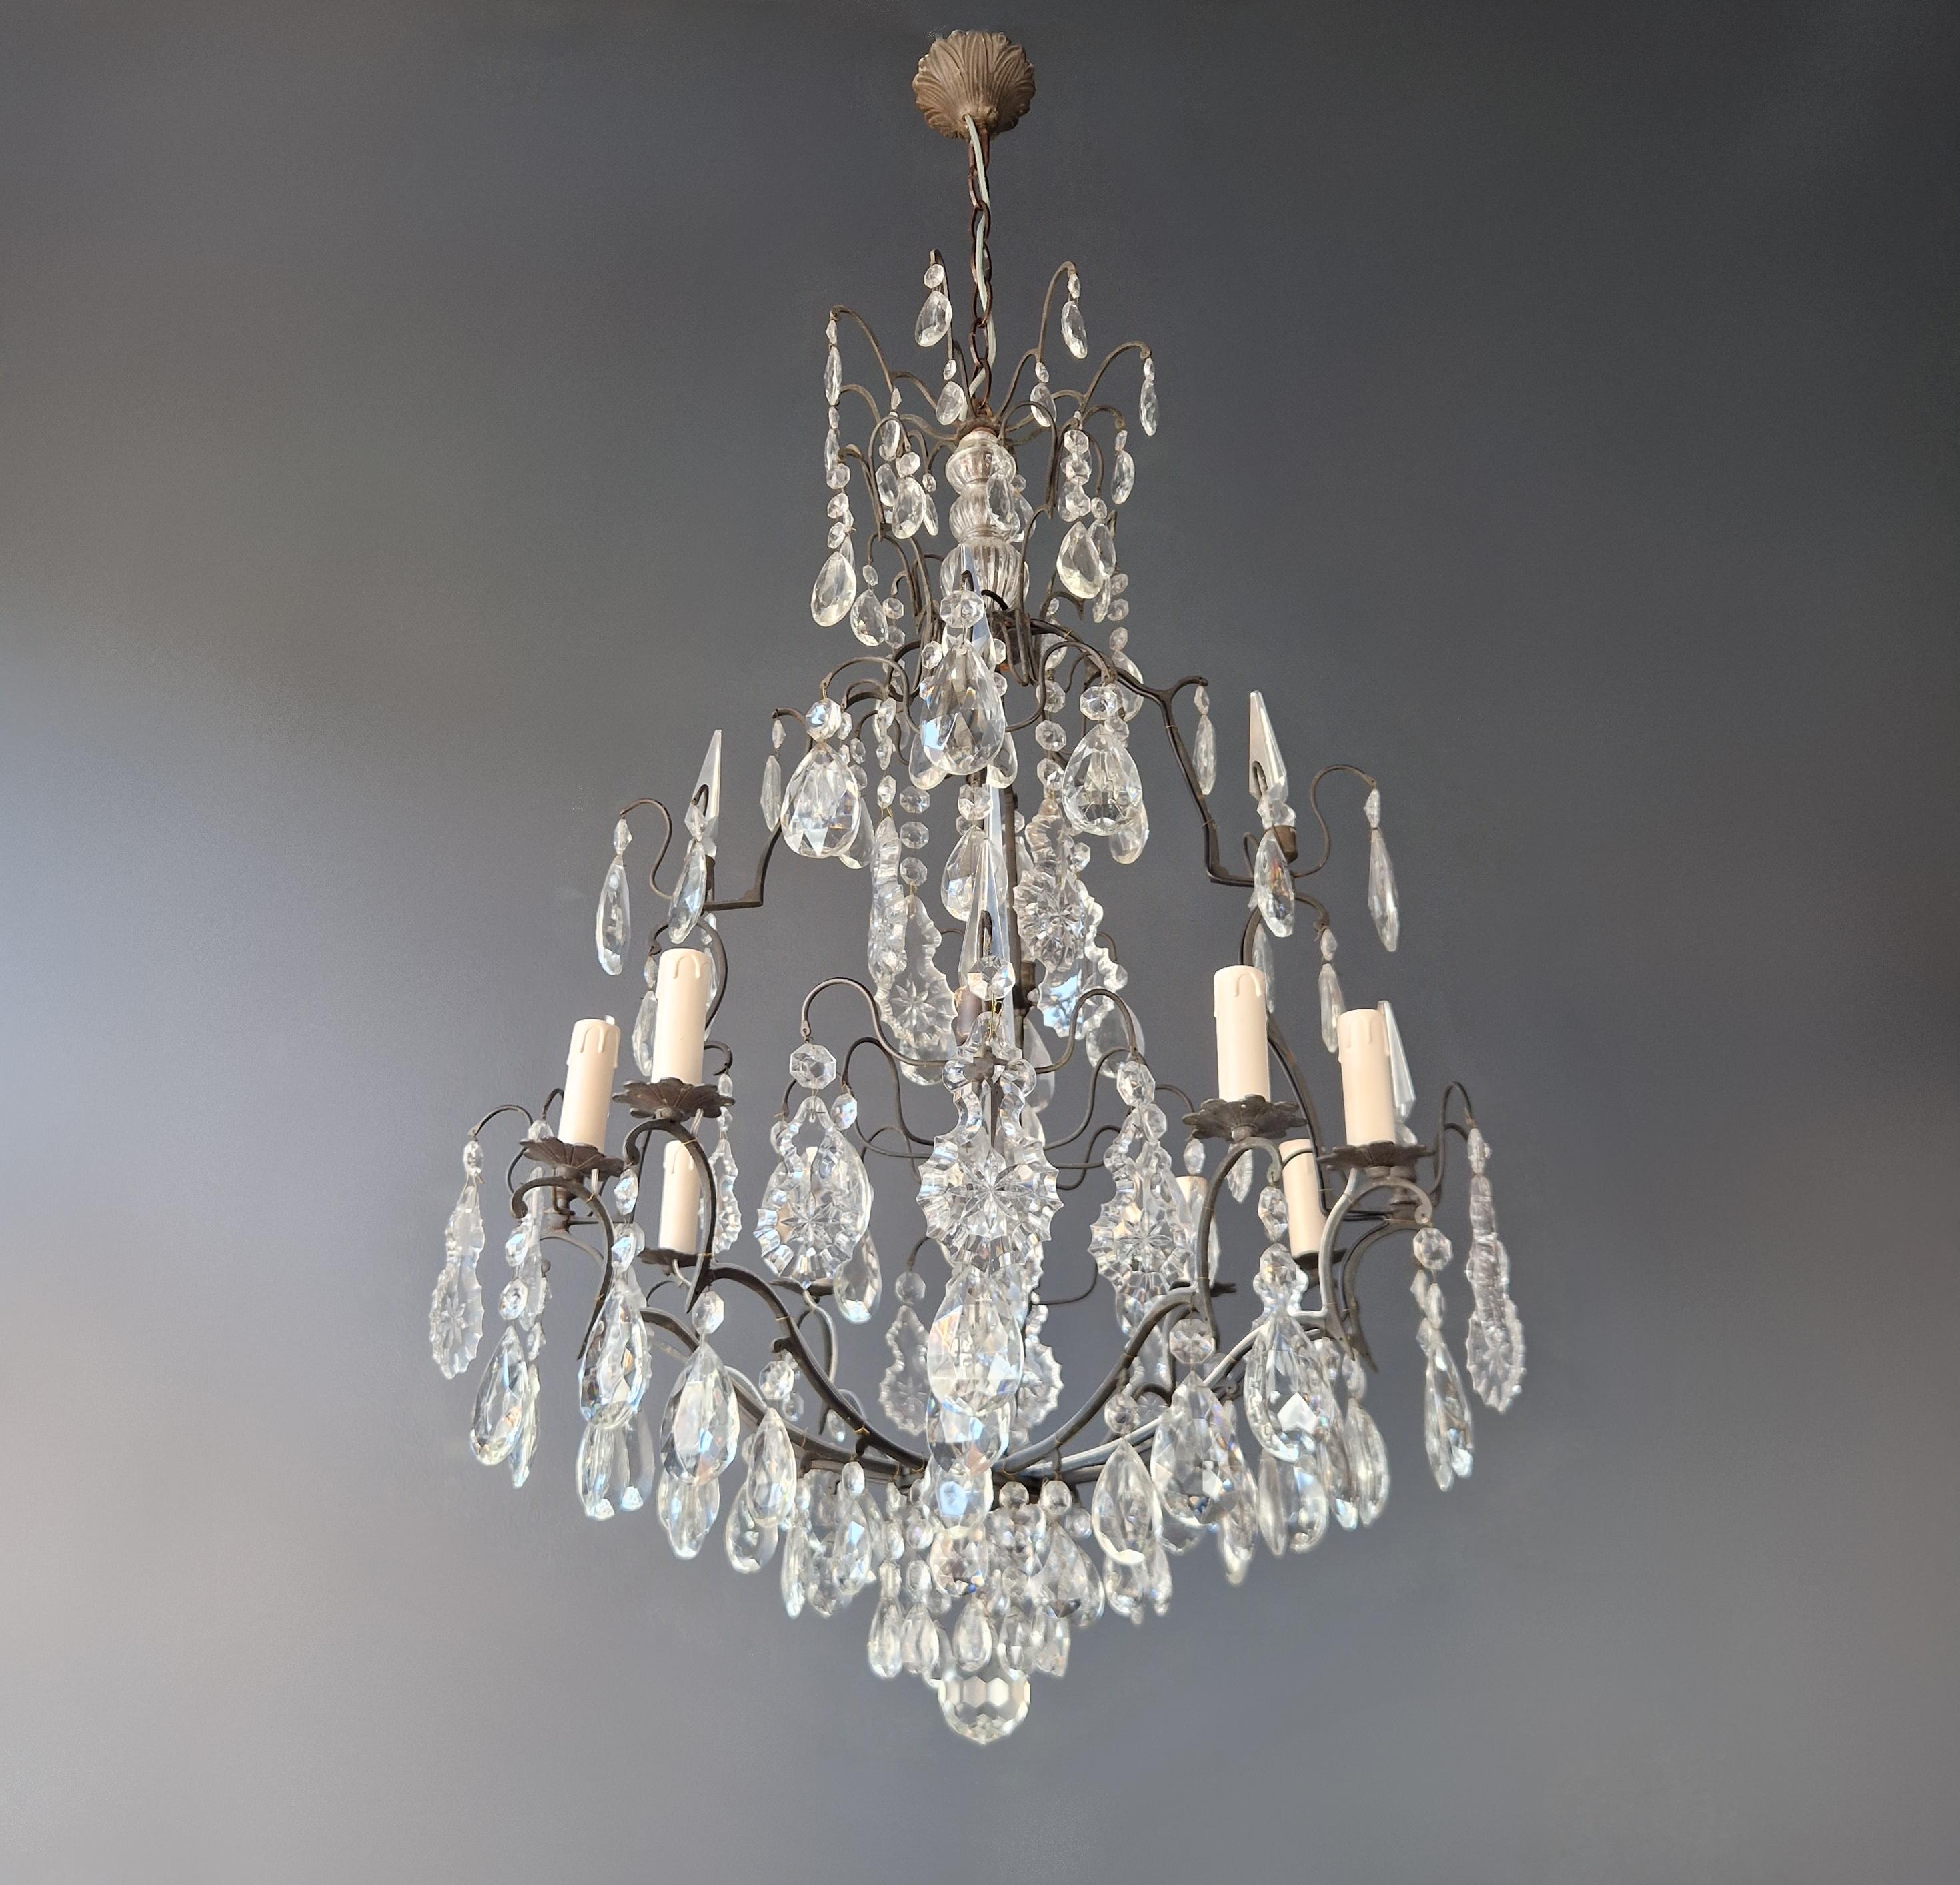 For sale is a stunning old chandelier that has been lovingly and professionally restored in Berlin. Its electrical wiring is compatible with the US, as it has been completely re-wired and is ready to be hung. Each crystal has been meticulously